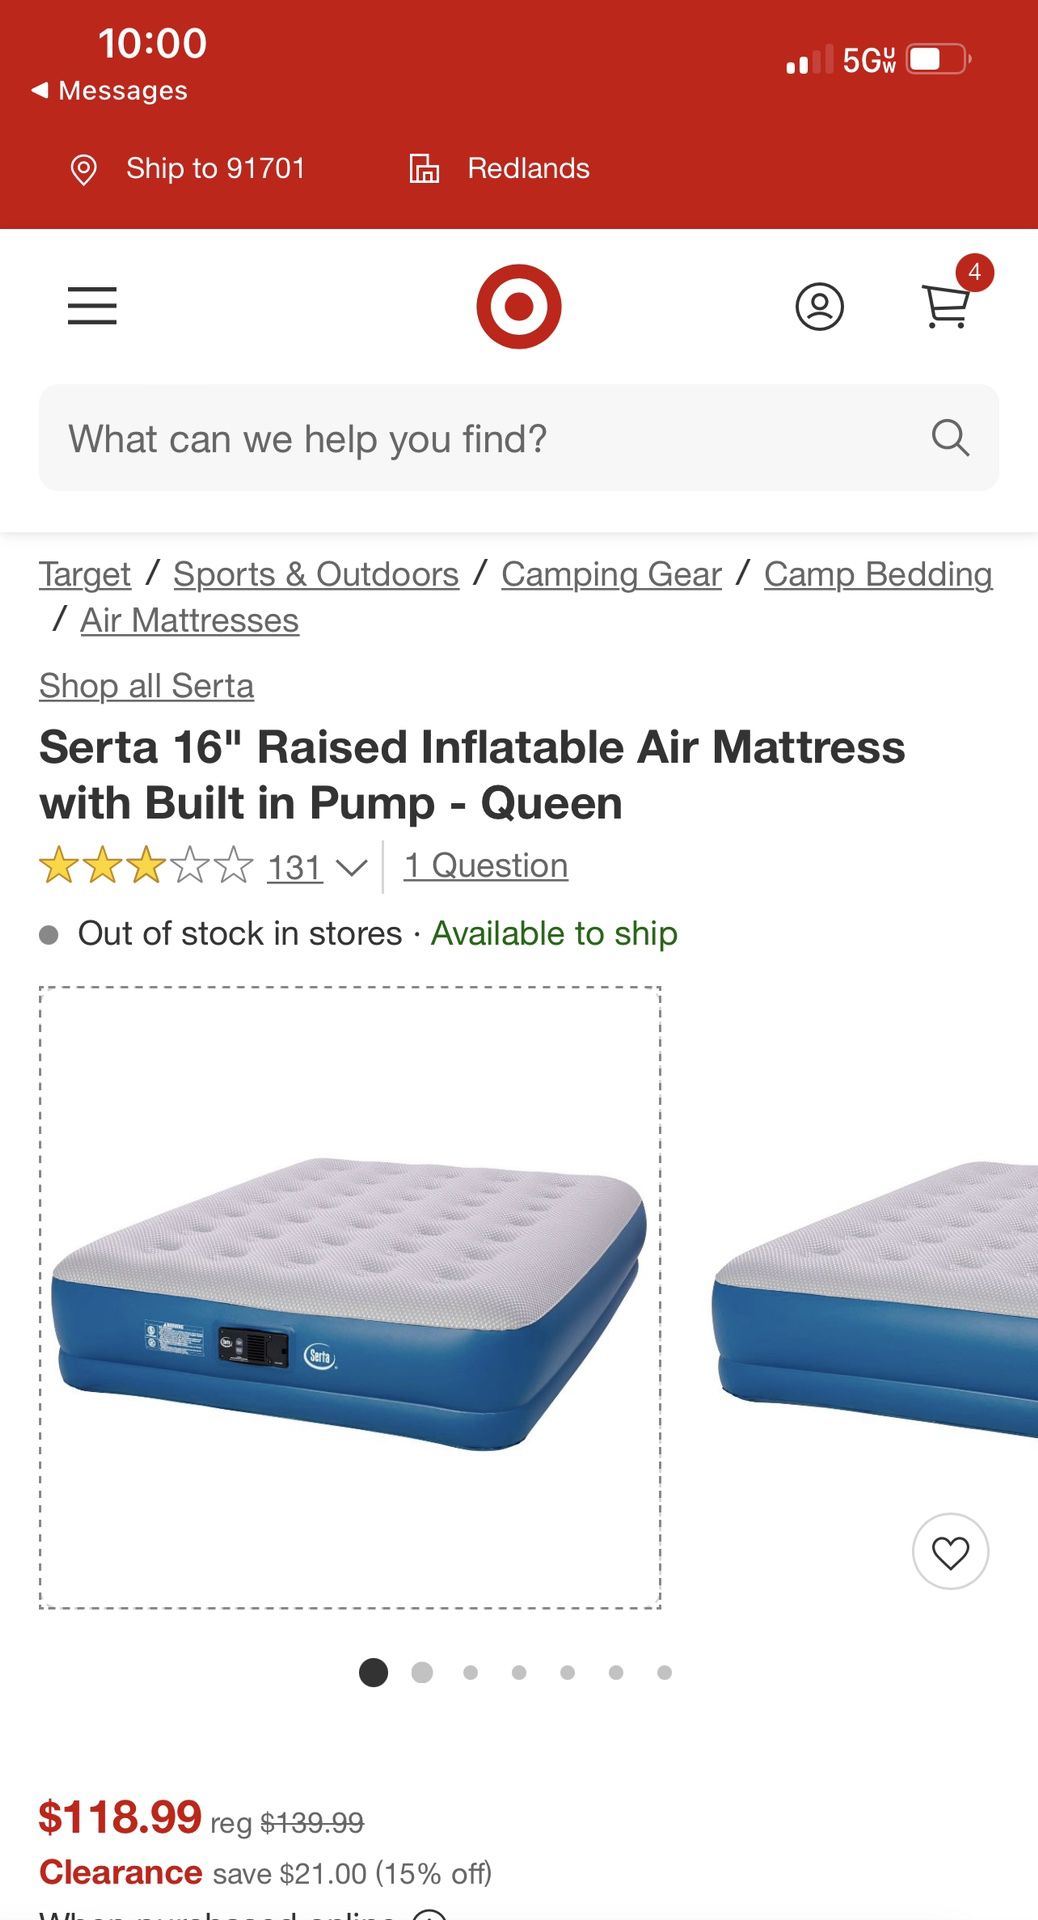 Serta 16" Raised Inflatable Air Mattress with Built in Pump - Queen